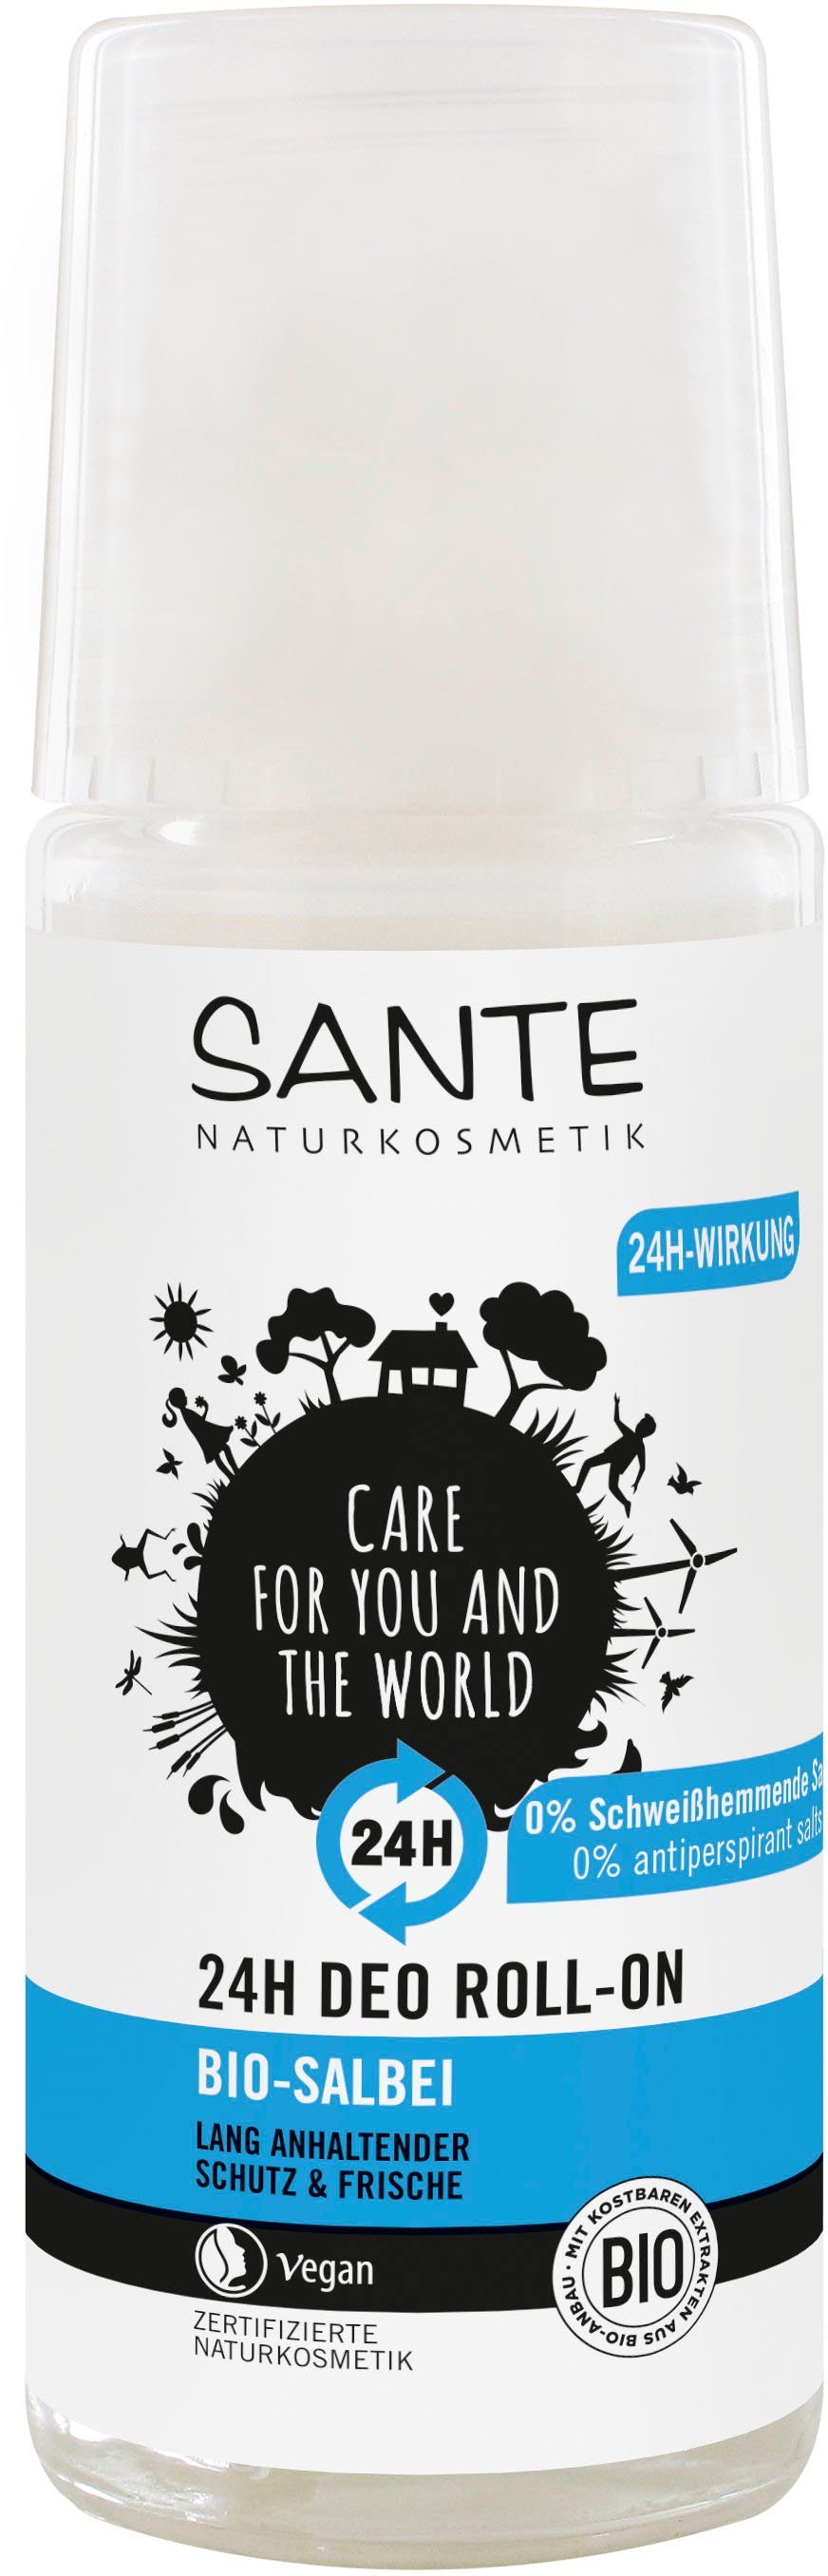 SANTE Deo-Roller »Deo Roll-on 24H« online kaufen | OTTO